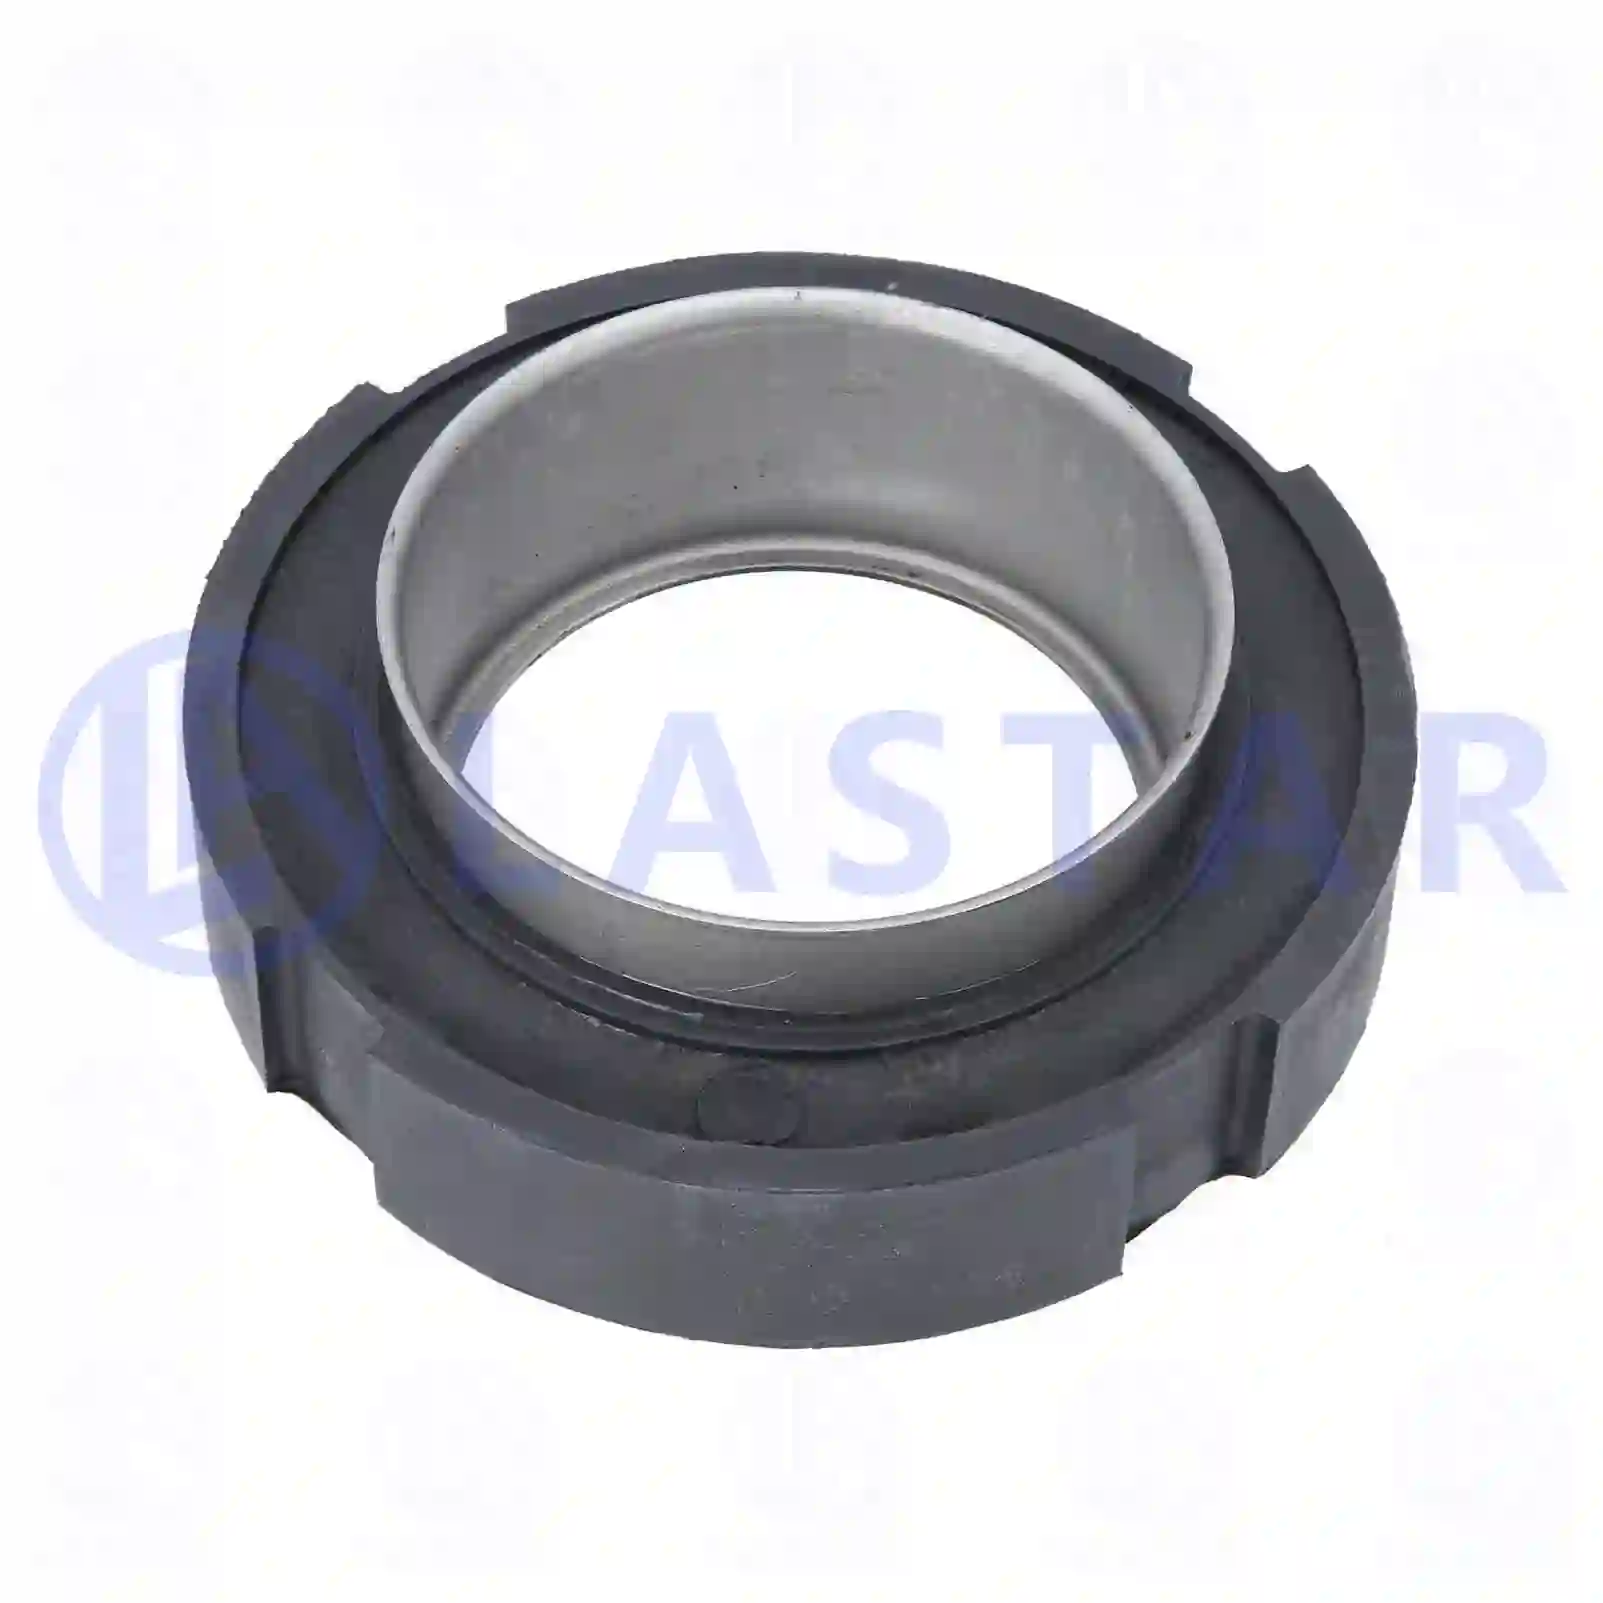 Support Bearing Center bearing, la no: 77734412 ,  oem no:1387794, 2592184, ZG02471-0008 Lastar Spare Part | Truck Spare Parts, Auotomotive Spare Parts